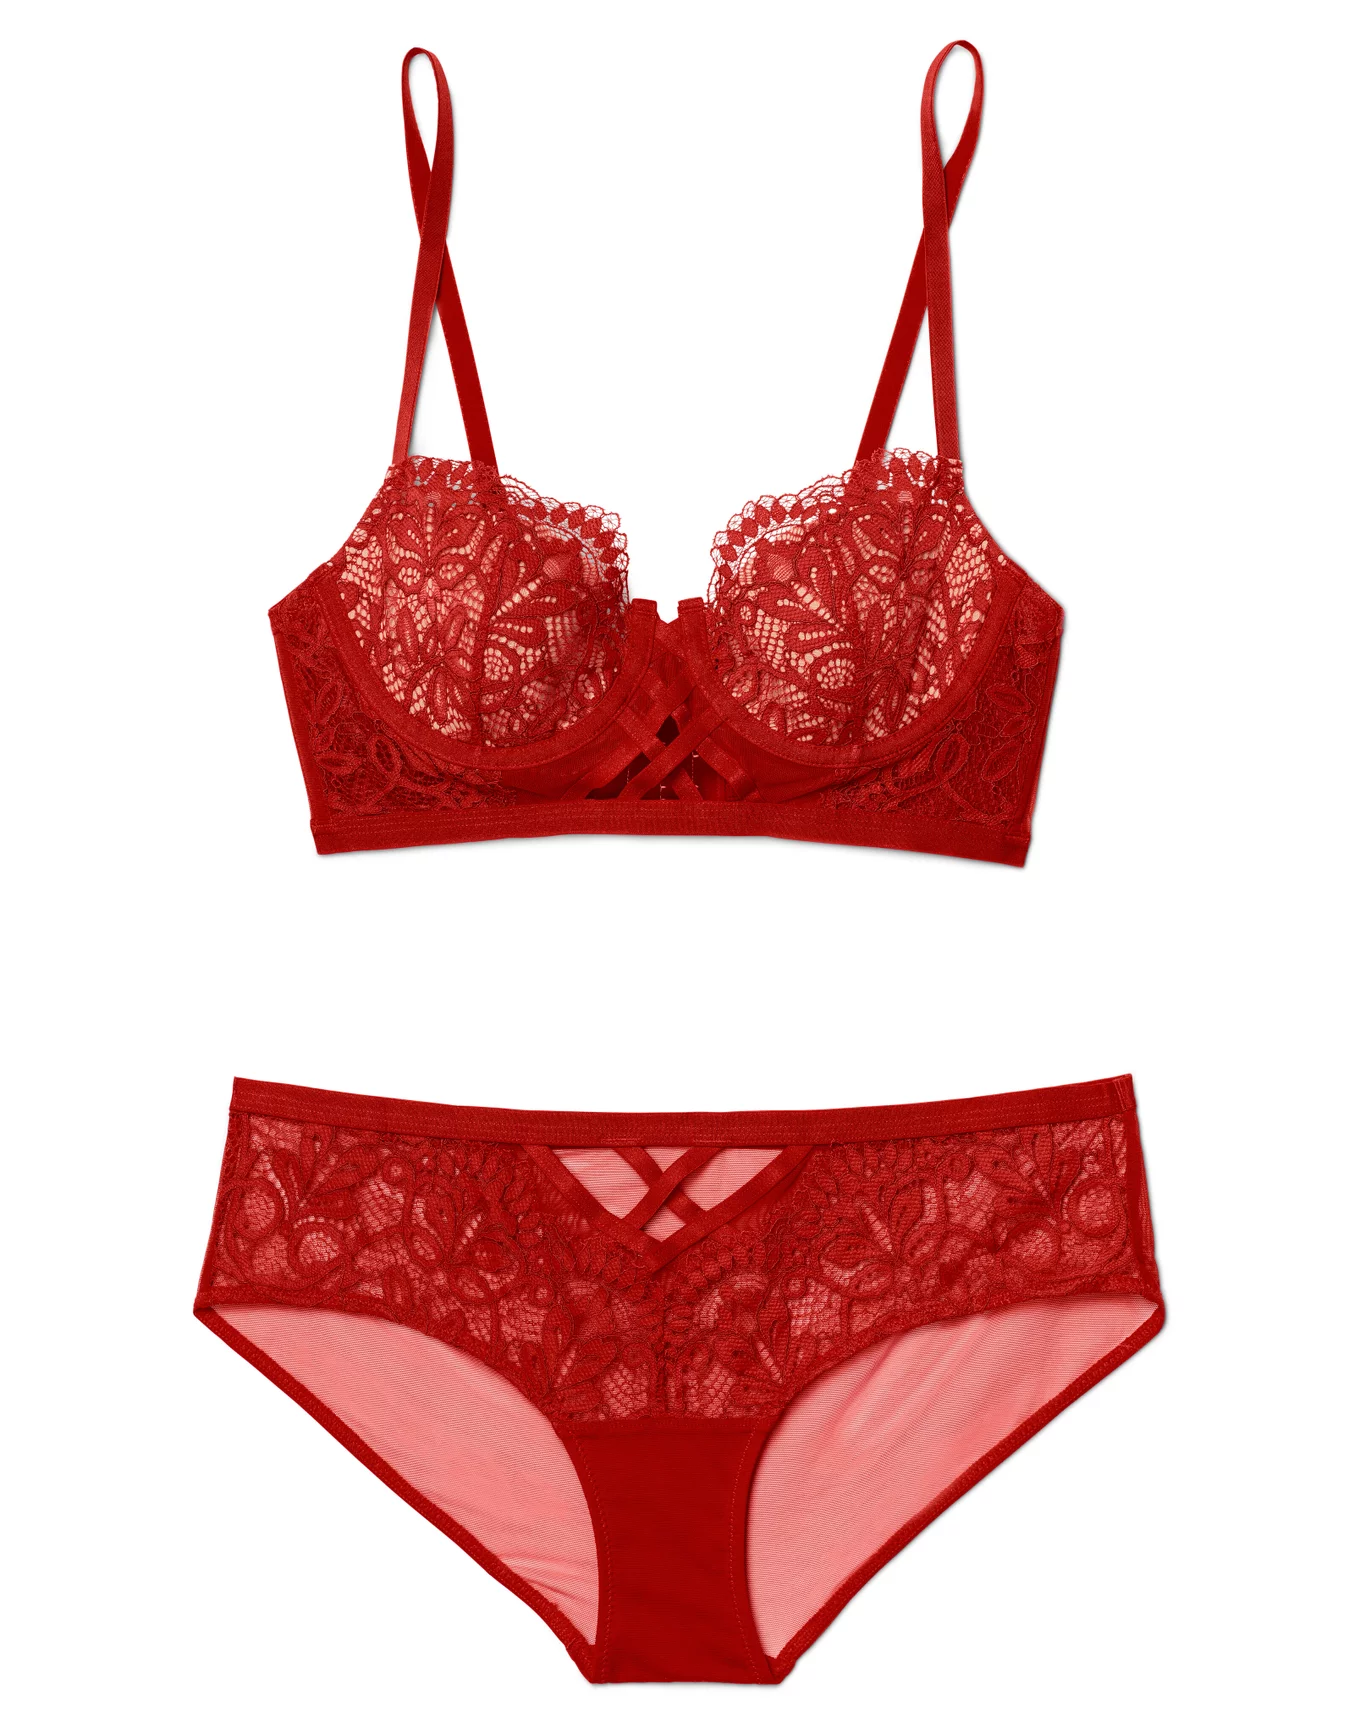 Buy Fascinating Lingerie Oh! Gorgeous Embraceable Red Bra Set (D, 34) at